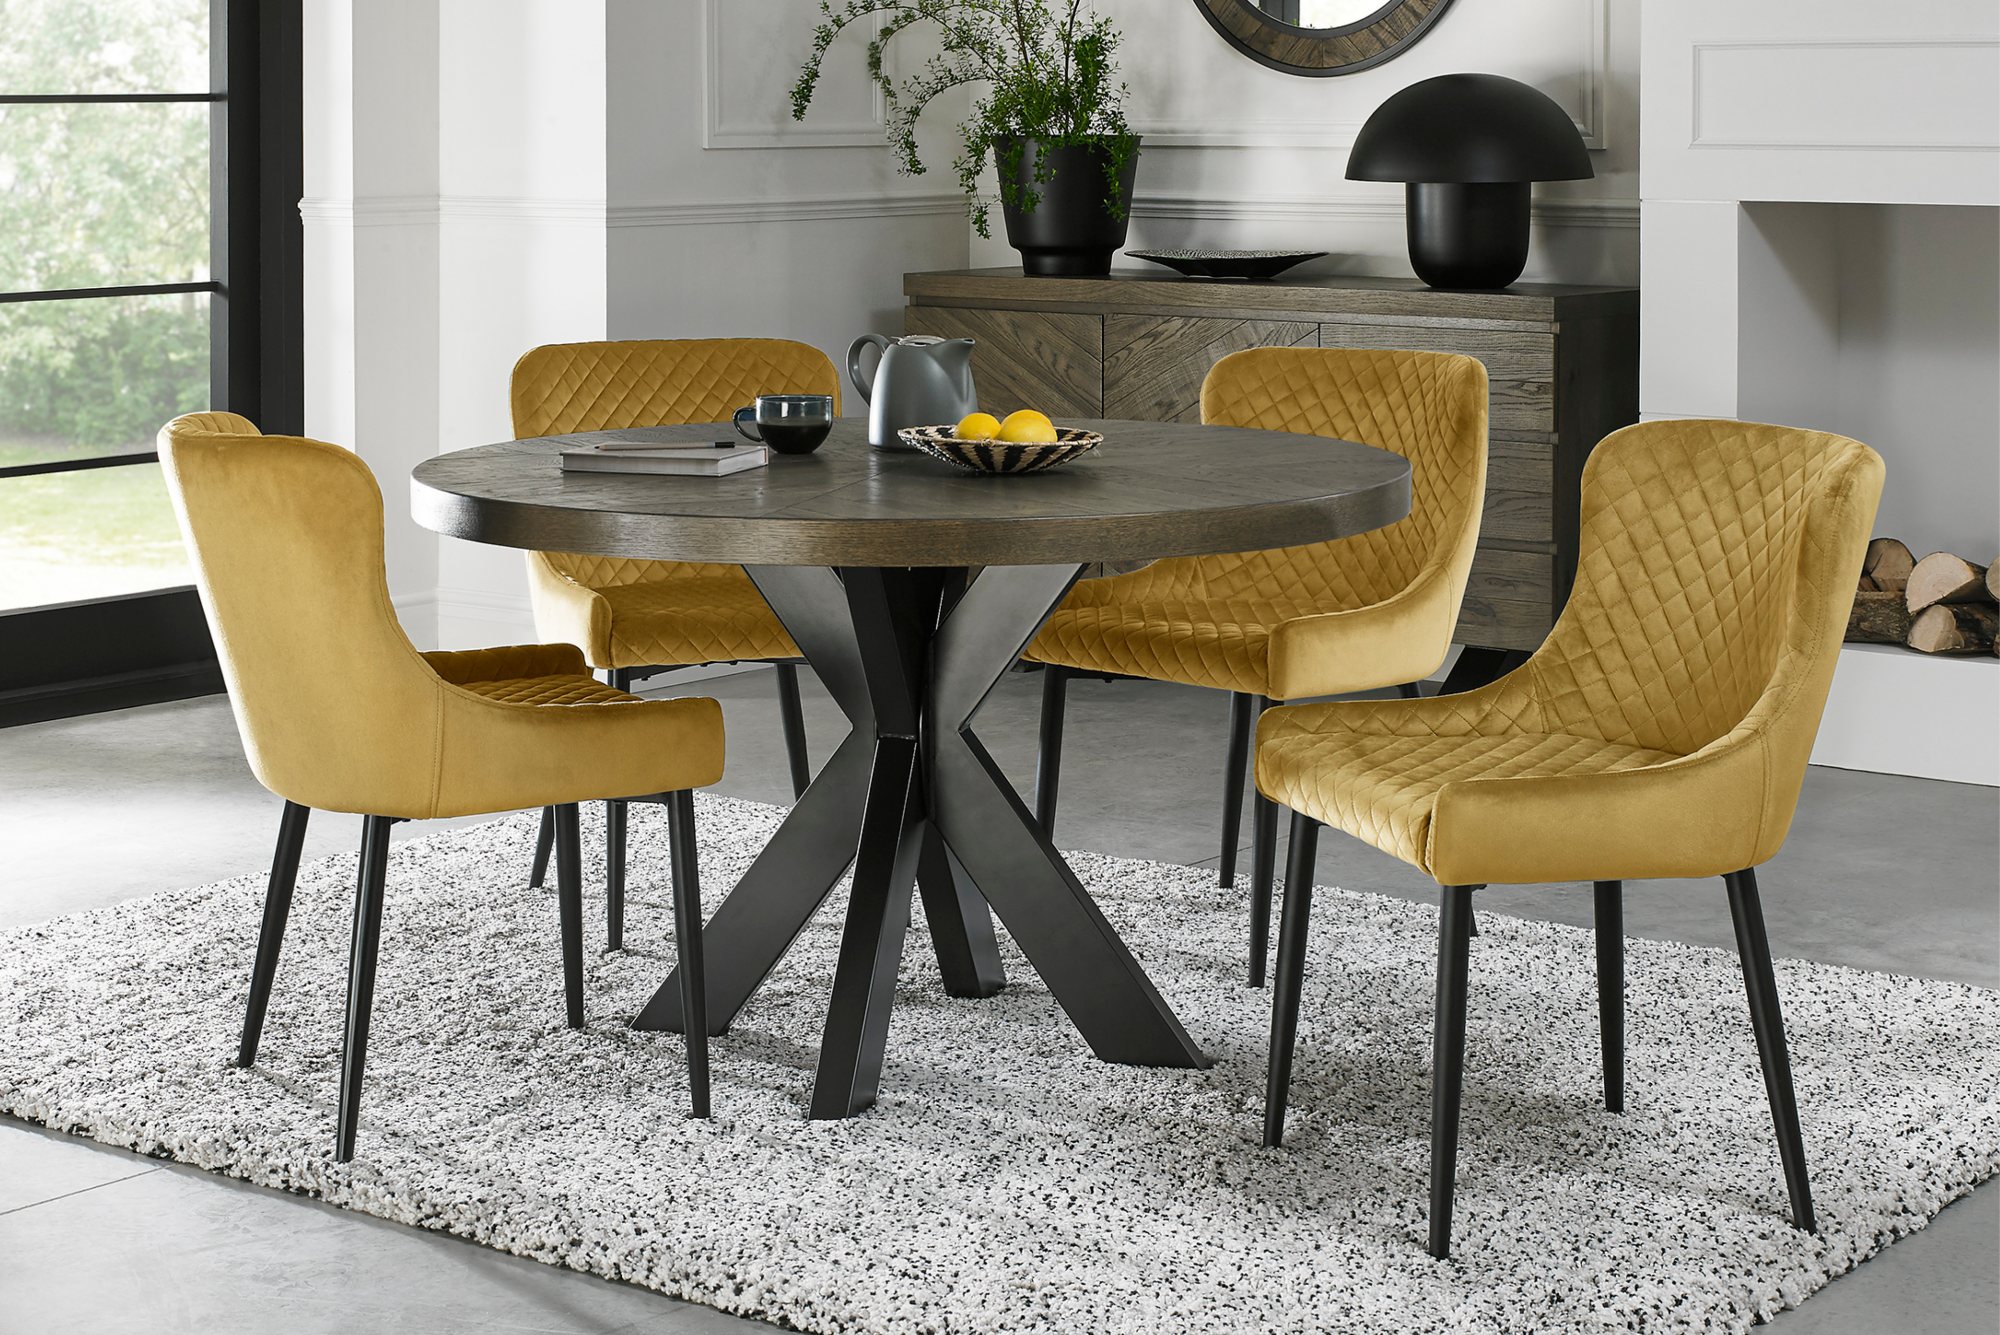 Home Origins Bosco fumed oak 4 seater dining table with 4 Cezanne chairs- mustard velvet fabric